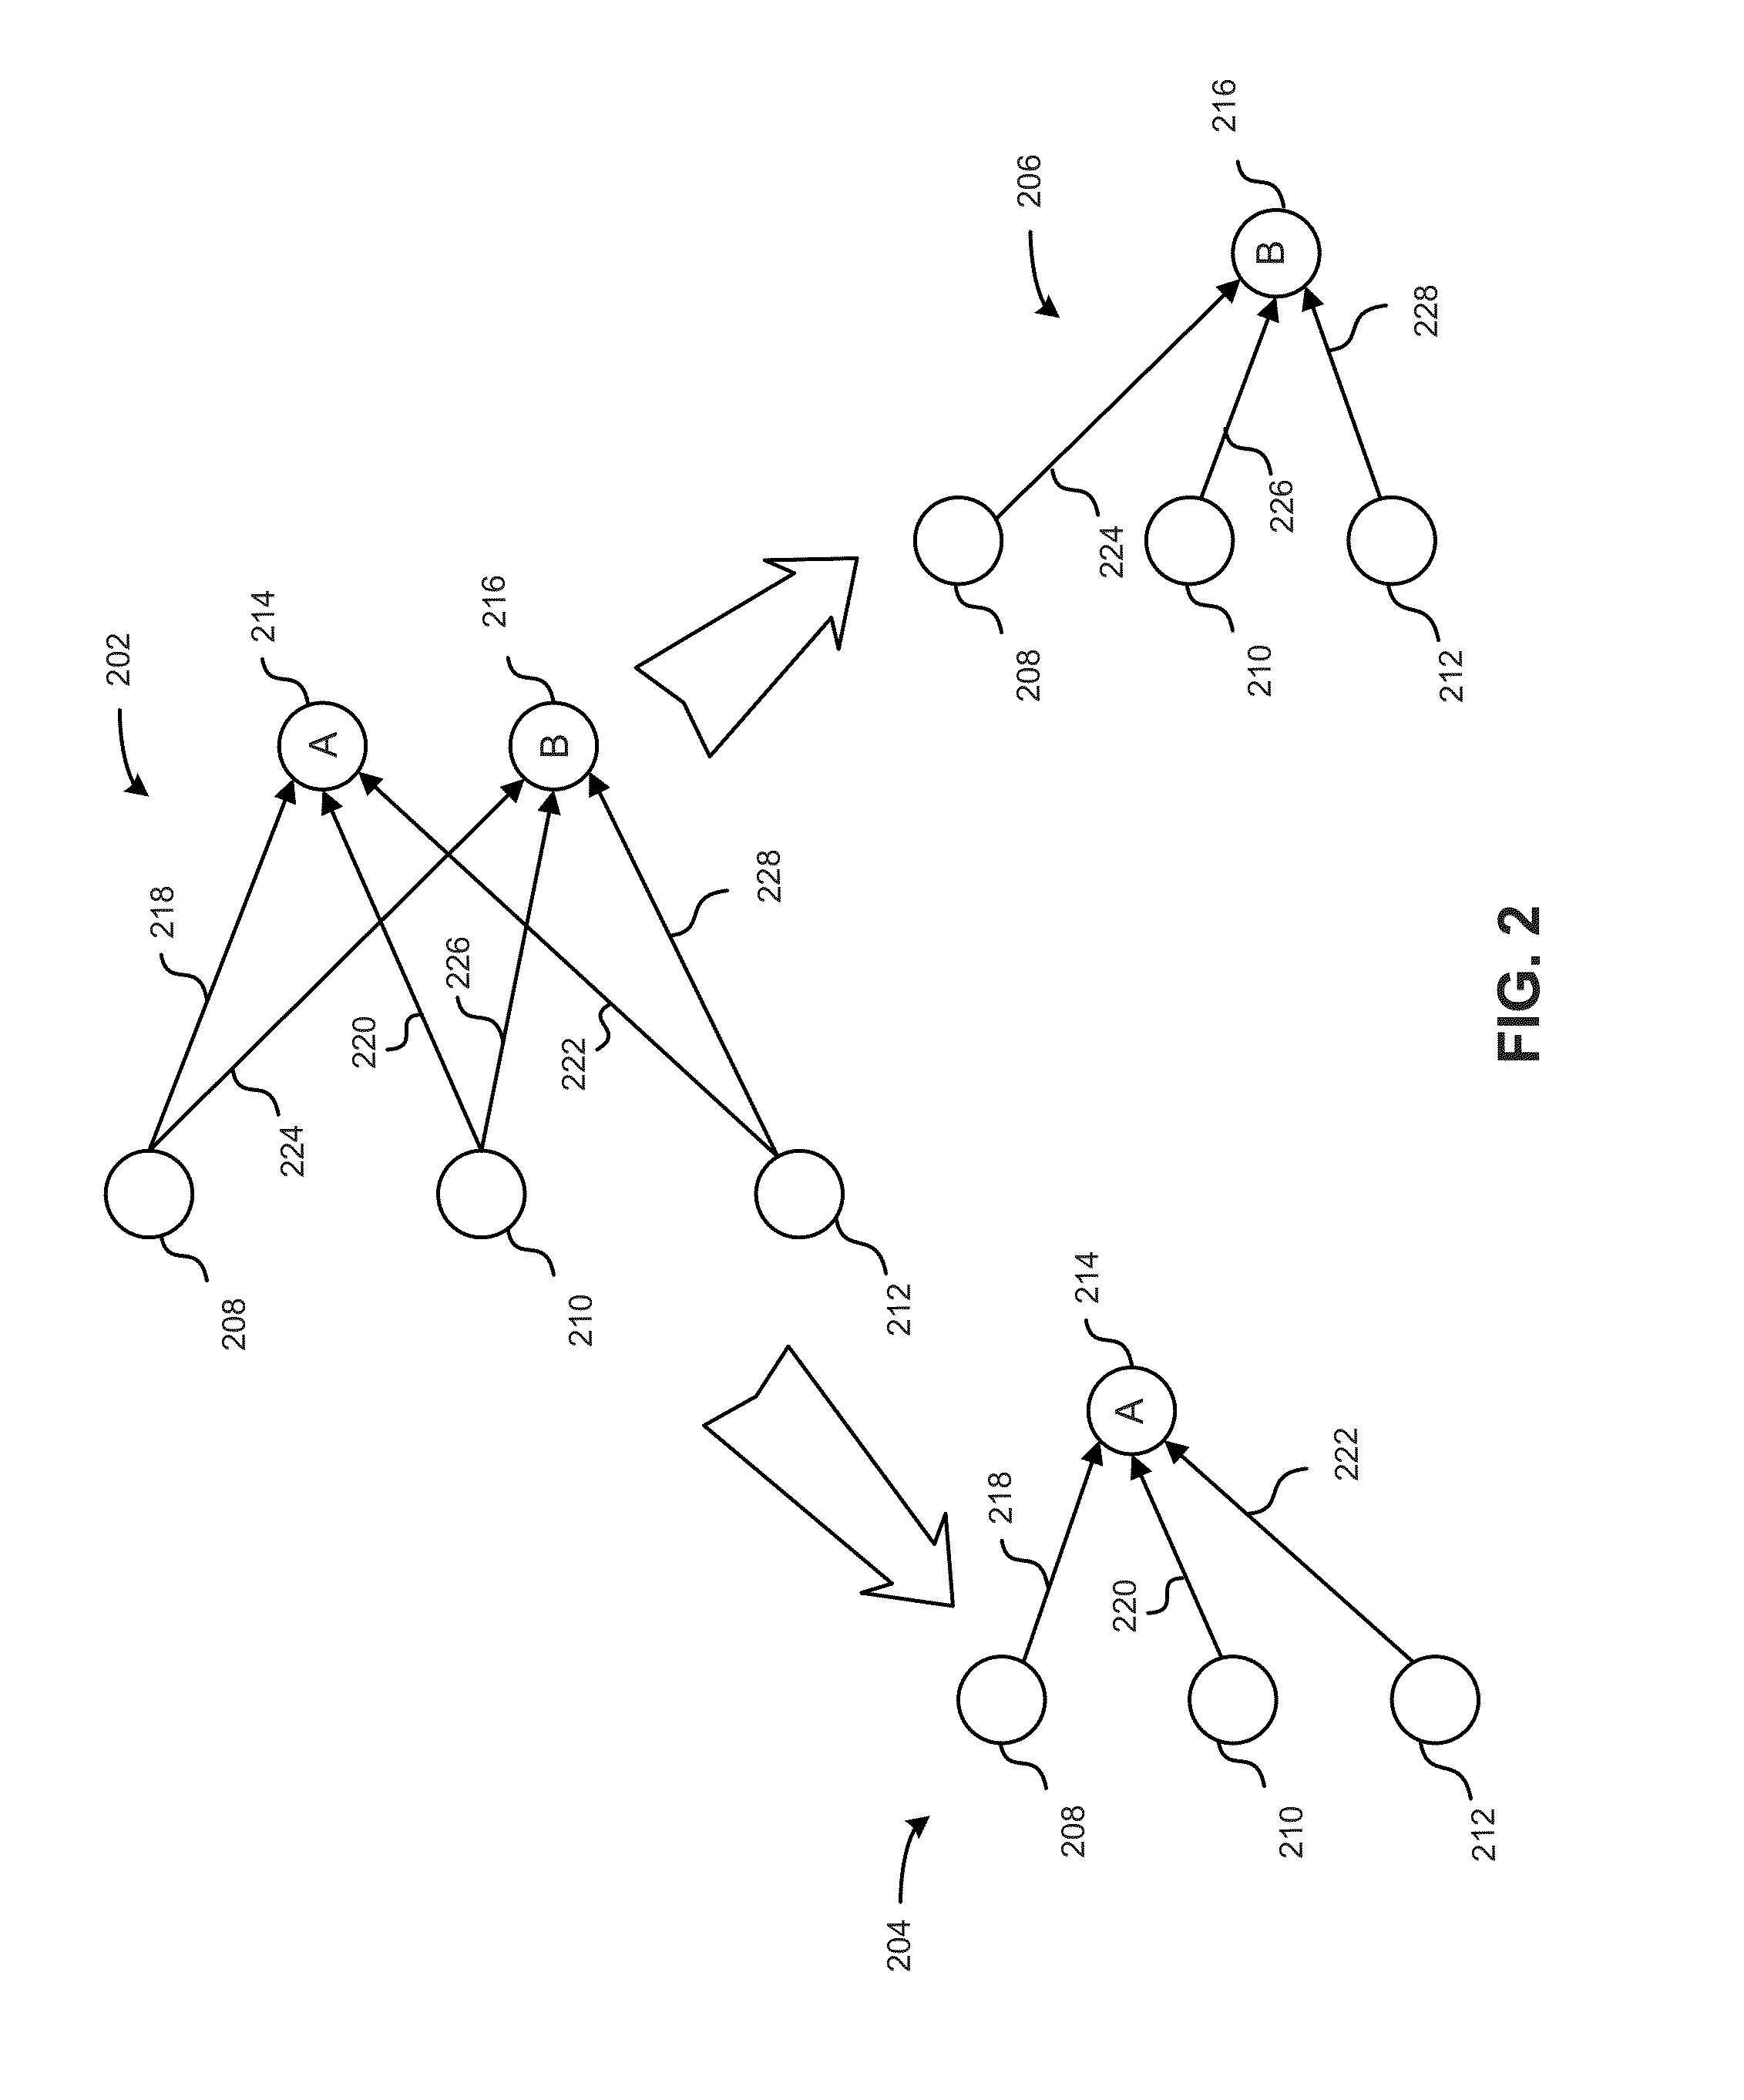 System and method for parallel search on explicitly represented graphs